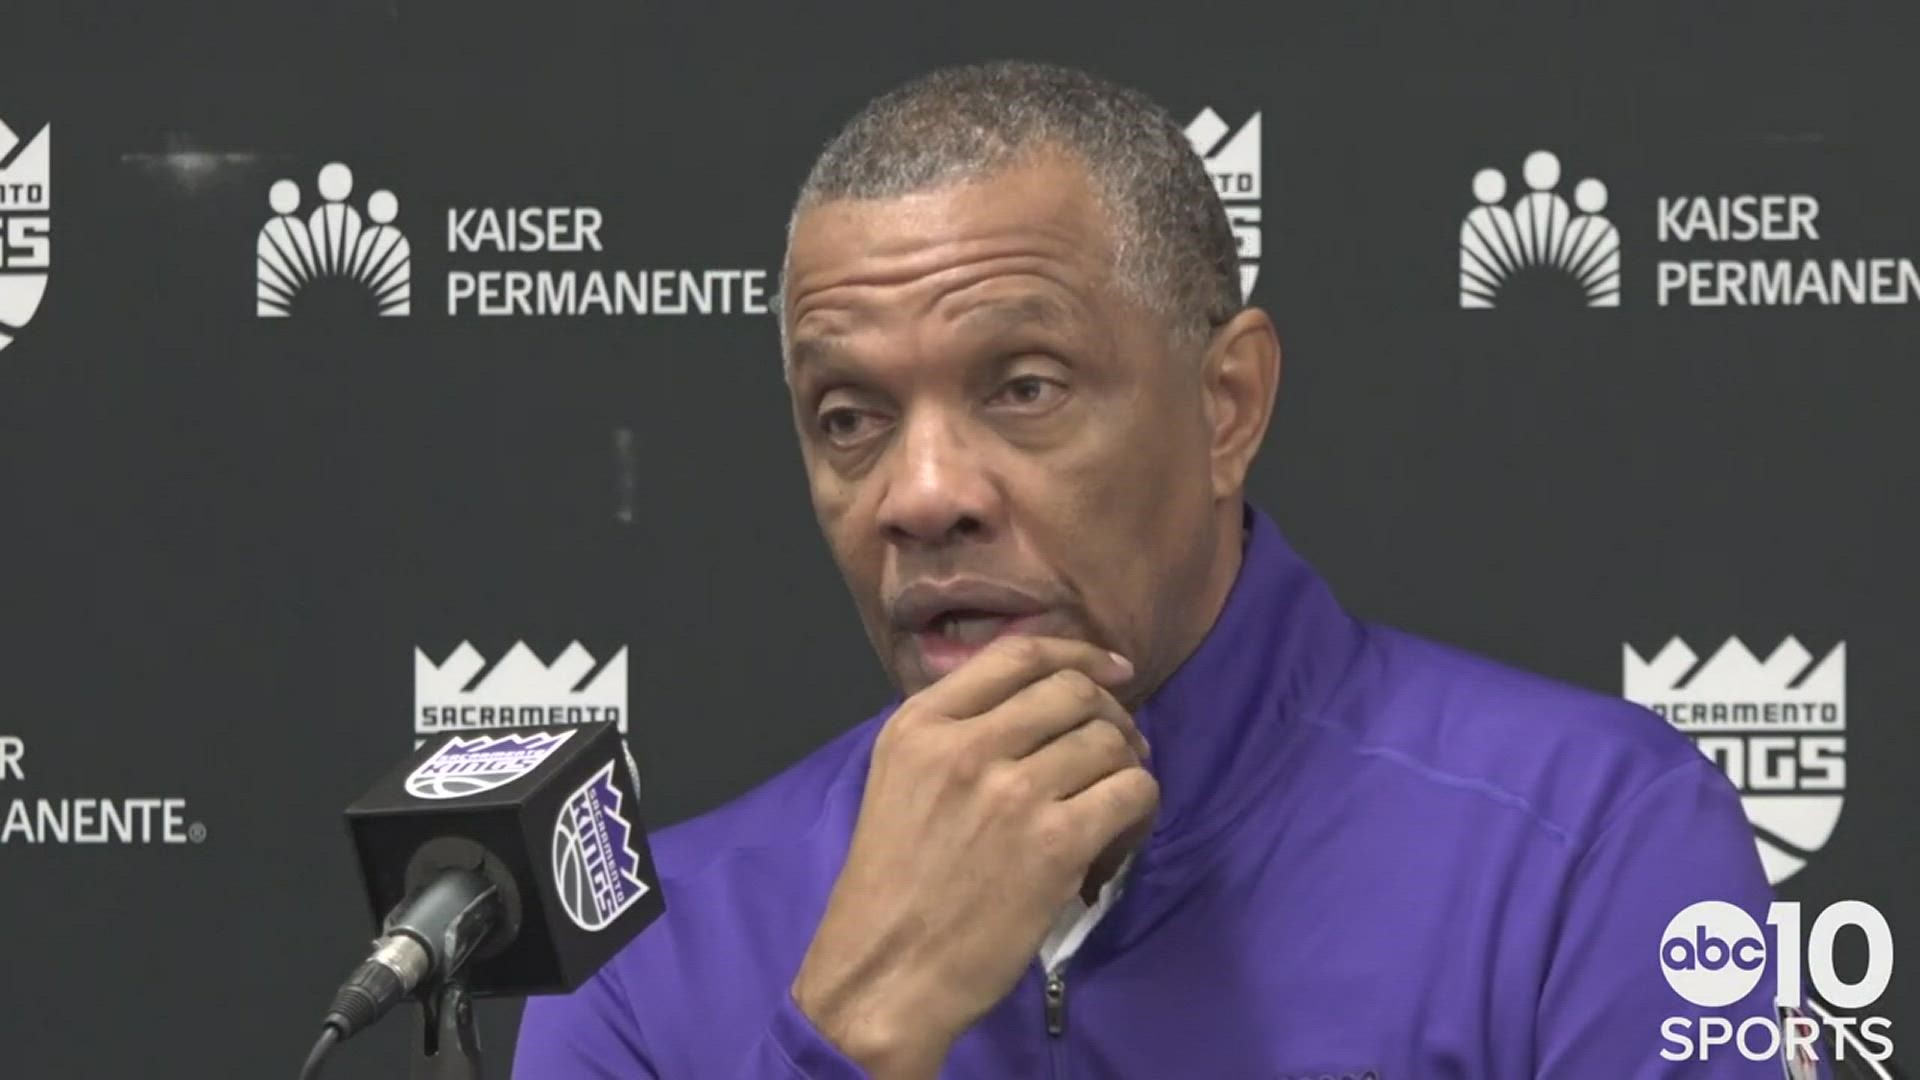 After Tuesday's 117-92 loss to the Lakers, Kings interim coach Alvin Gentry apologizes to the fans after Sacramento's 'embarrassing' second half performance.